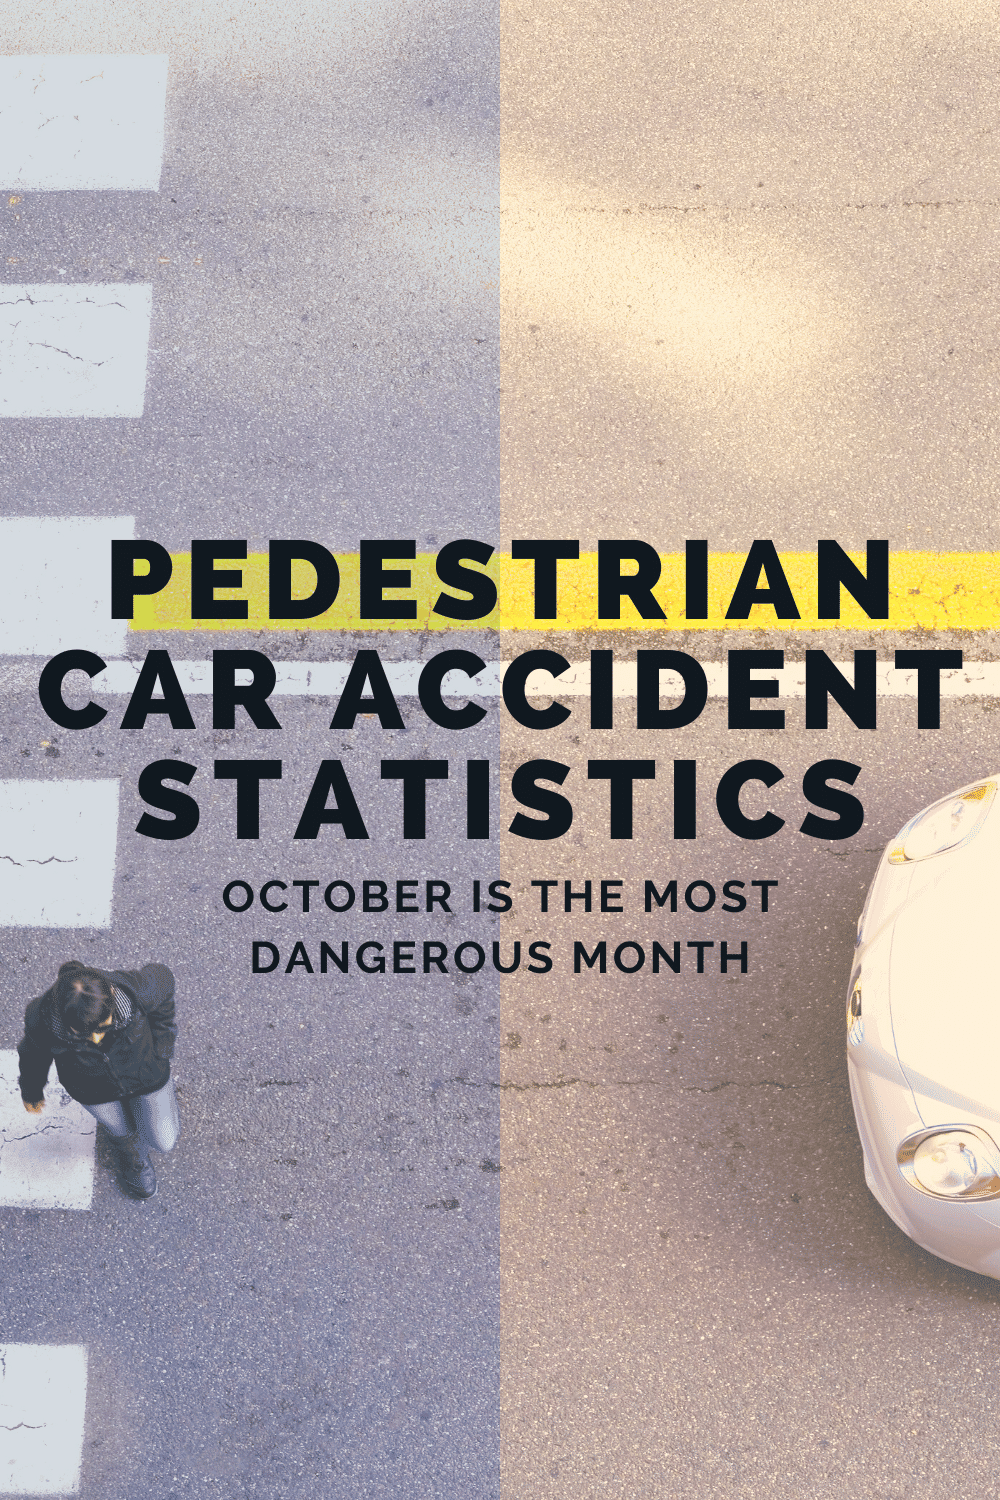 Pedestrian Car Accident Statistics Show October Is The Most Dangerous Month